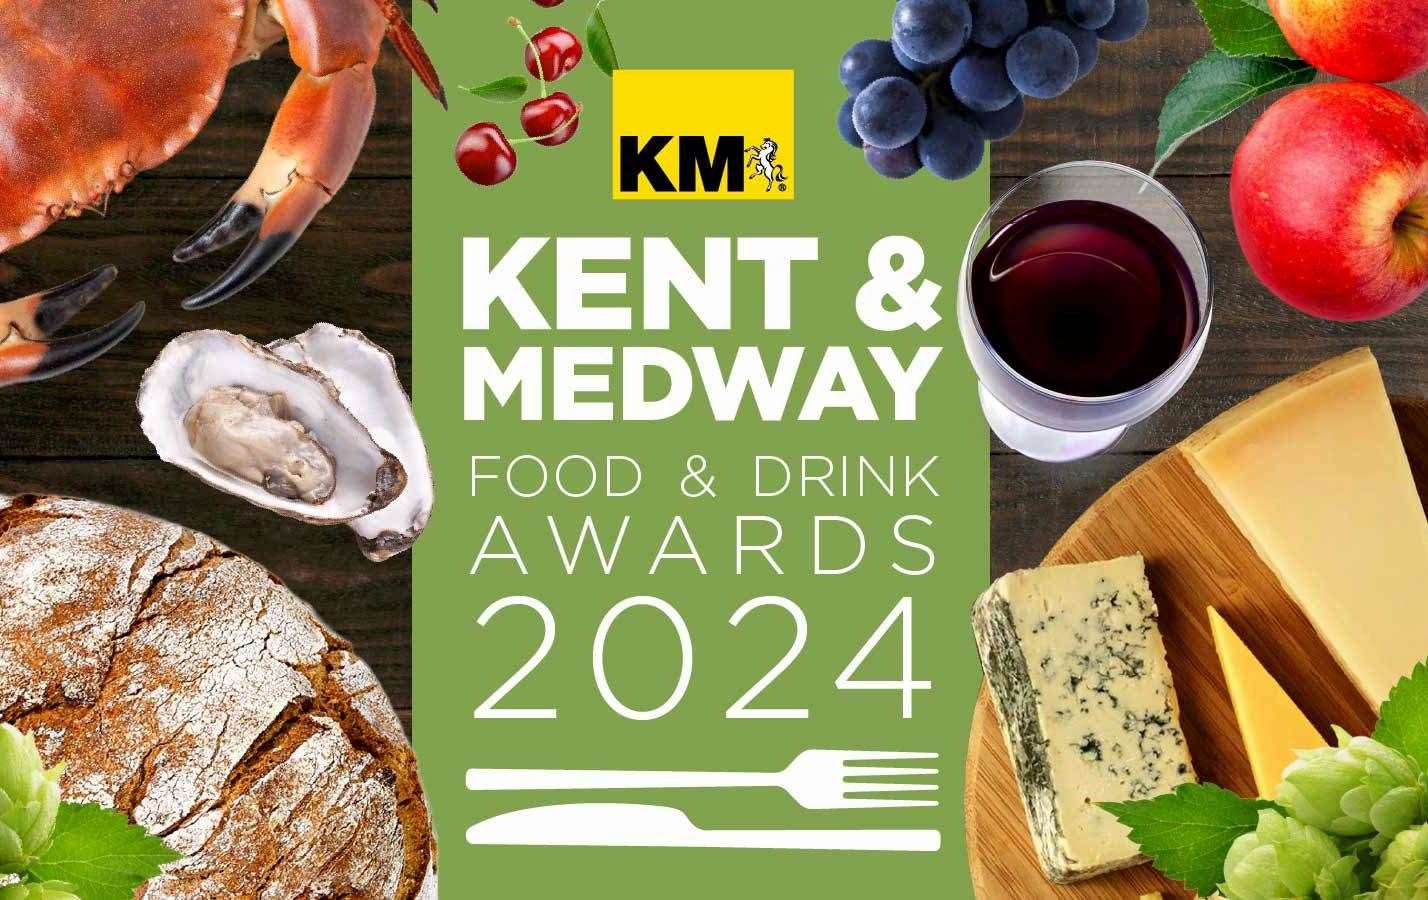 We can now reveal the full list of finalists for the first Kent & Medway Food & Drink Awards